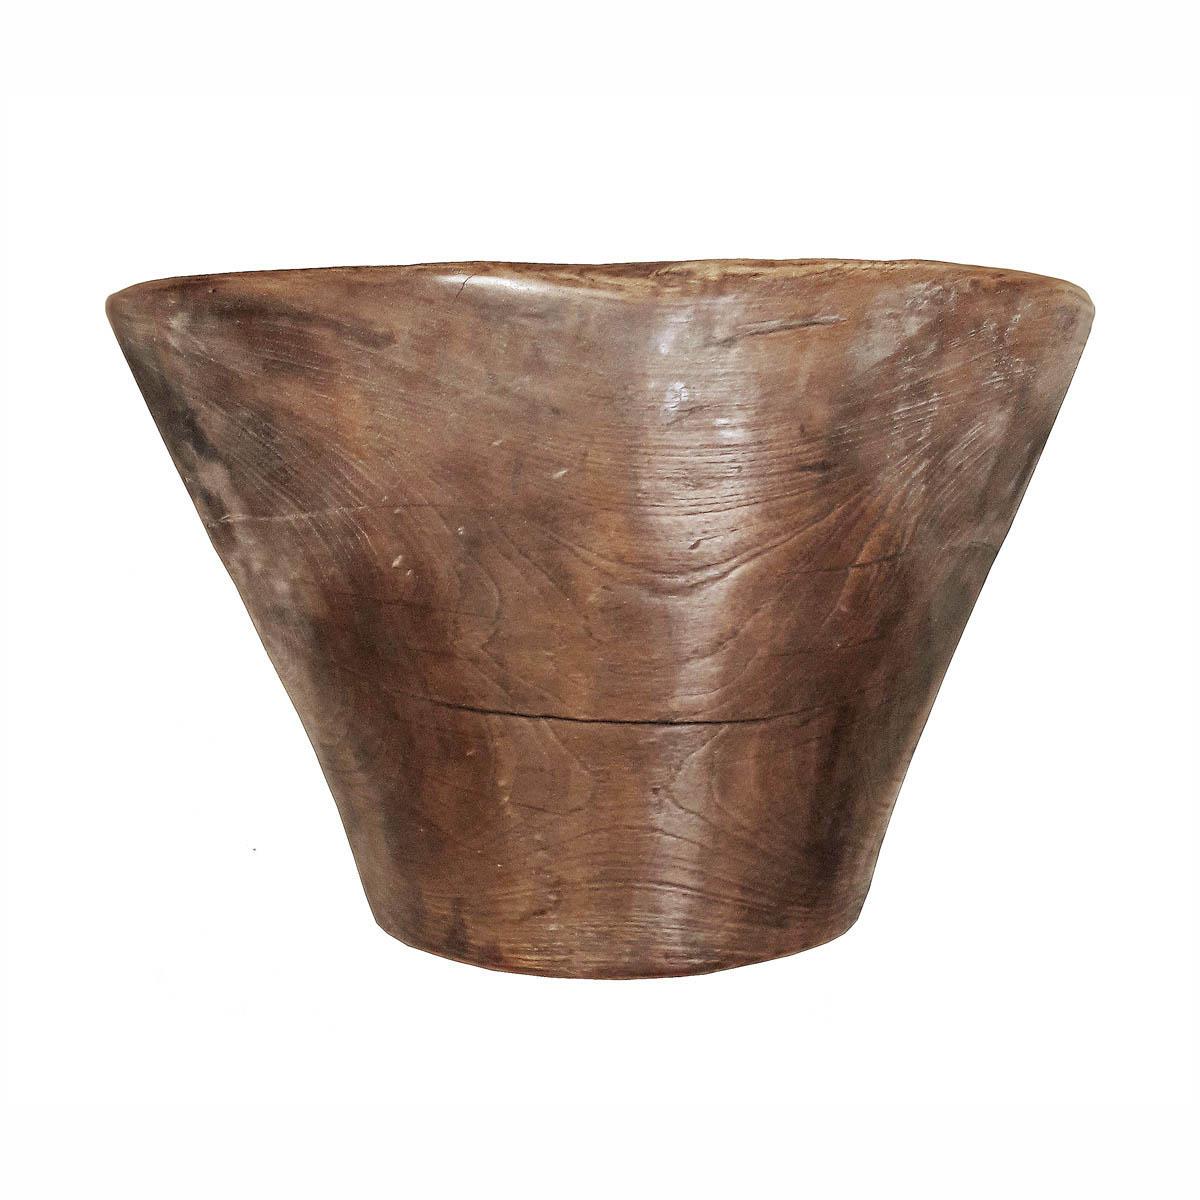 Other Wood Bowl / Planter from Indonesia, Hand Carved, Mid-20th Century For Sale